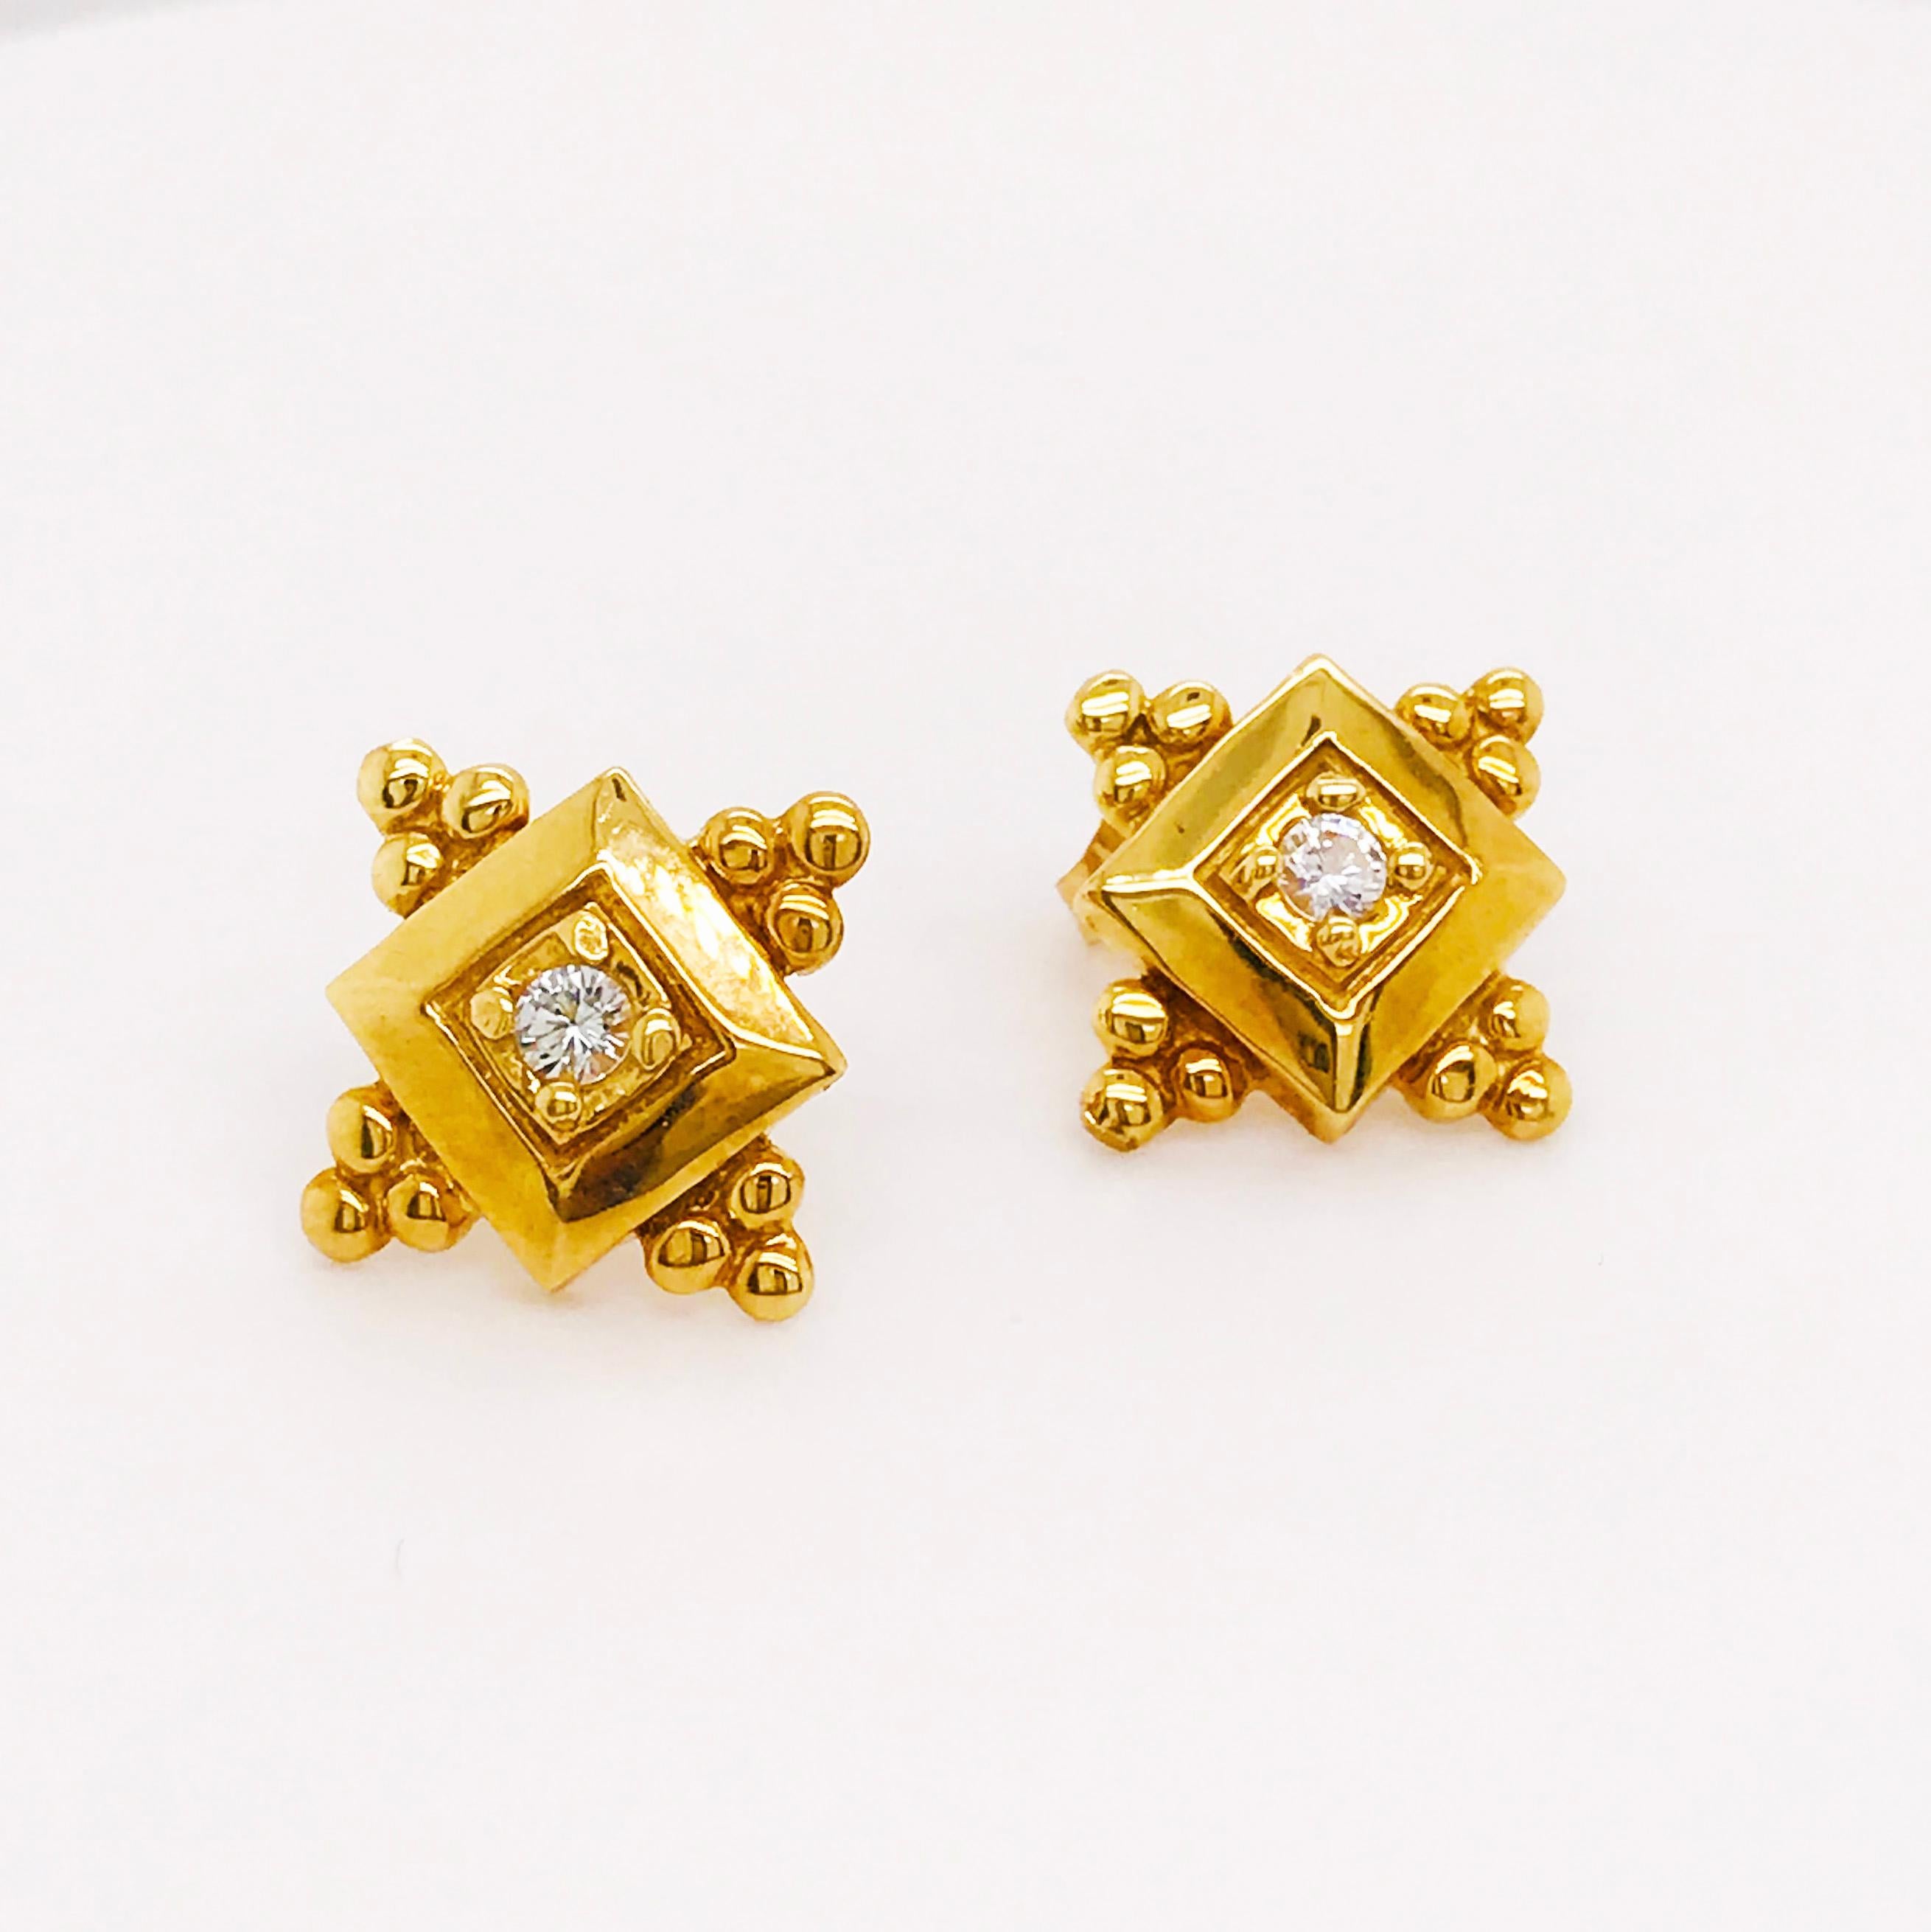 These one of a kind diamond stud earrings are custom estate earrings. With a hand crafted gold settings that has hand fabricated gold beading on all four sides for a balanced symmetry and unique look. These gold settings hold a round brilliant